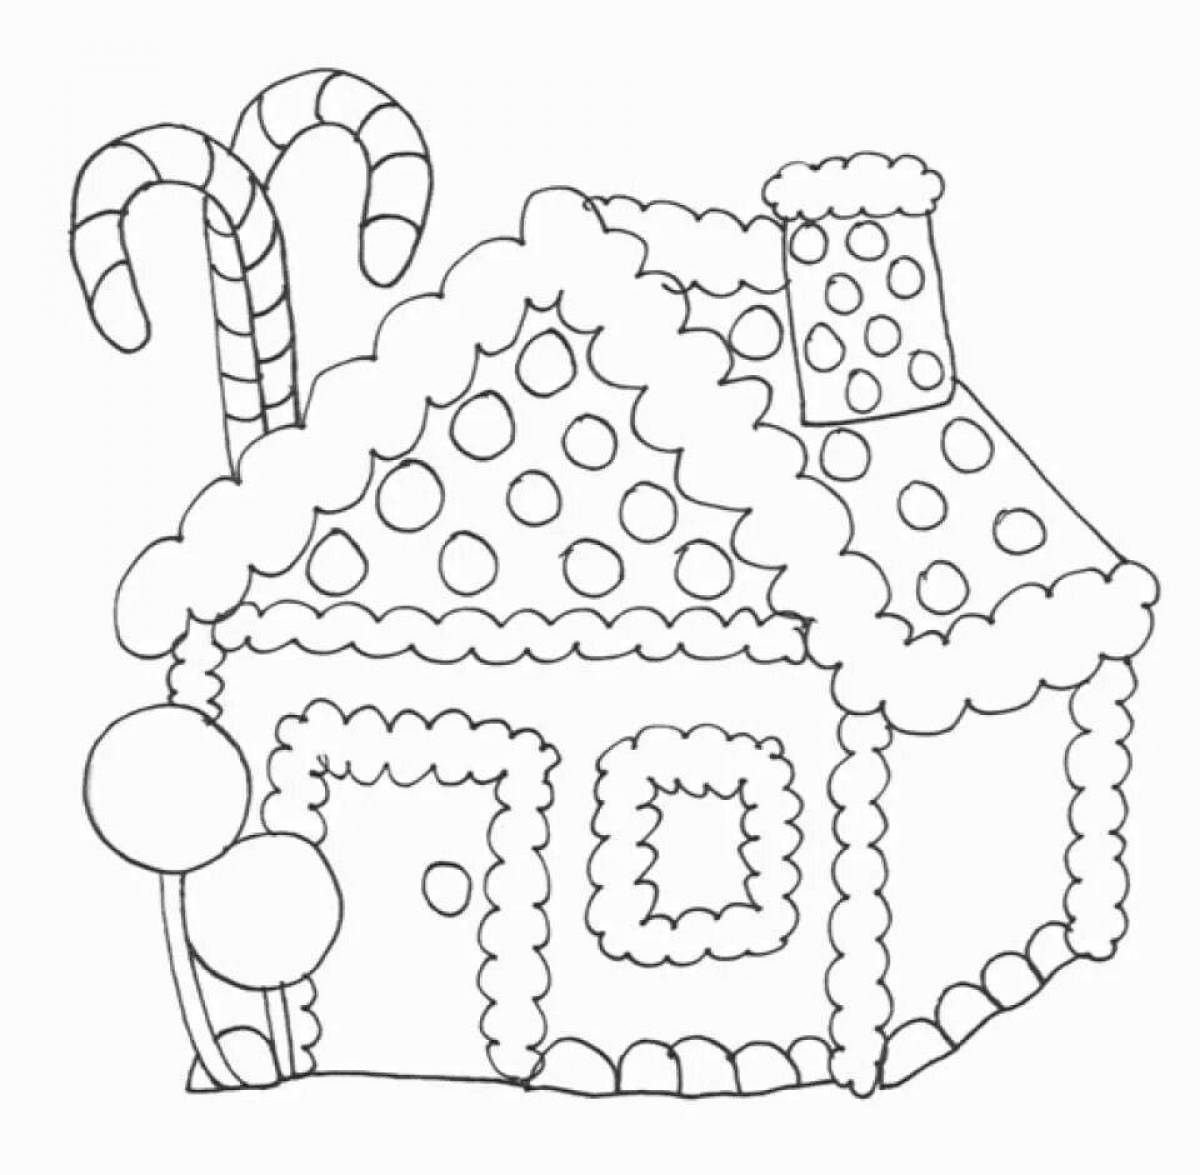 Gorgeous house coloring book for 4-5 year olds